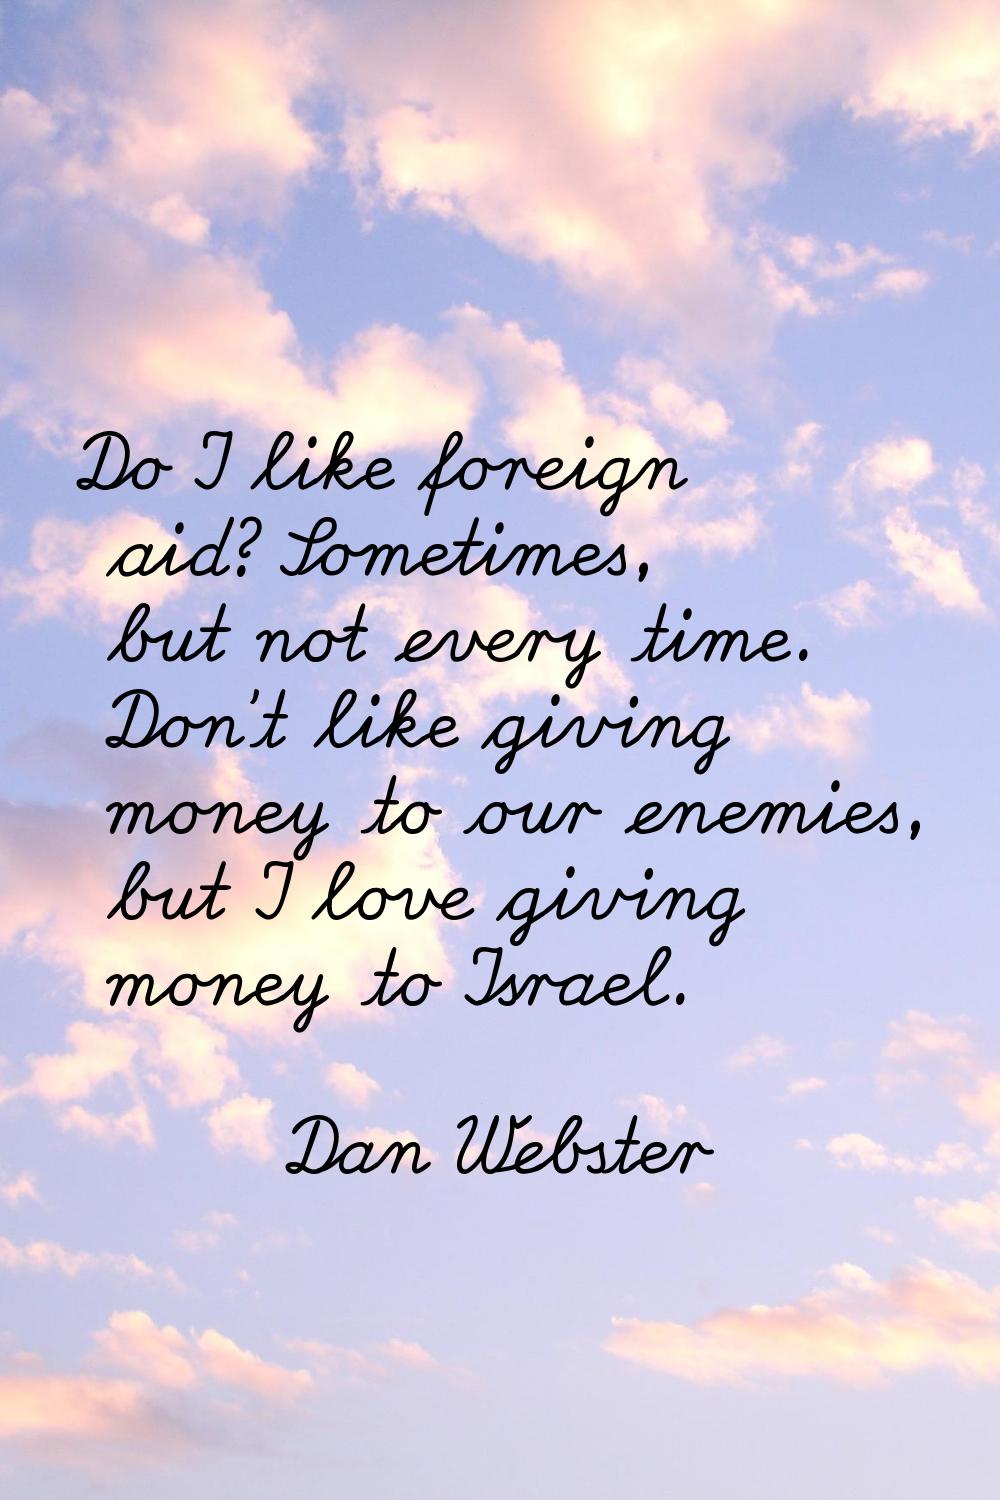 Do I like foreign aid? Sometimes, but not every time. Don't like giving money to our enemies, but I